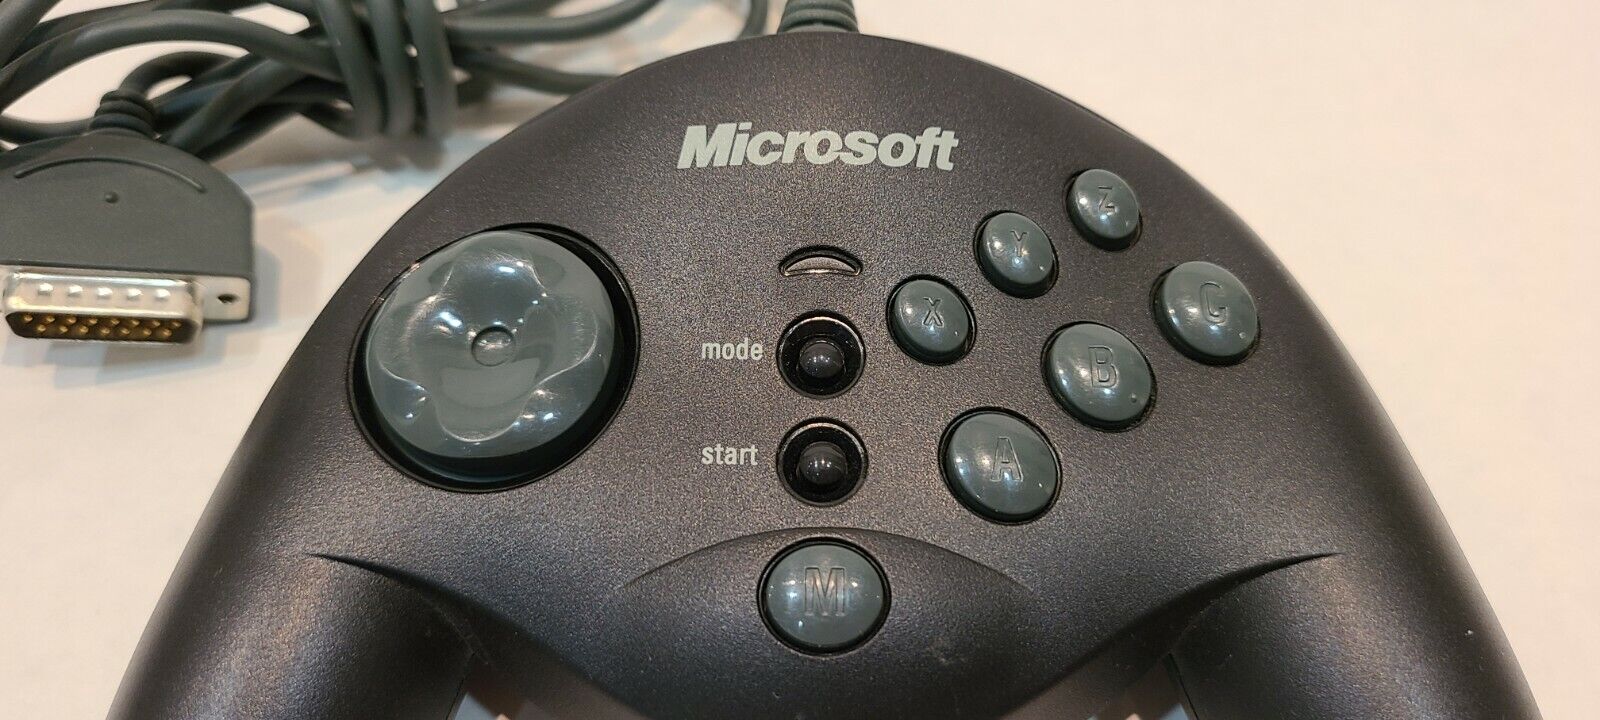 Microsoft SideWinder Game Pad for PC